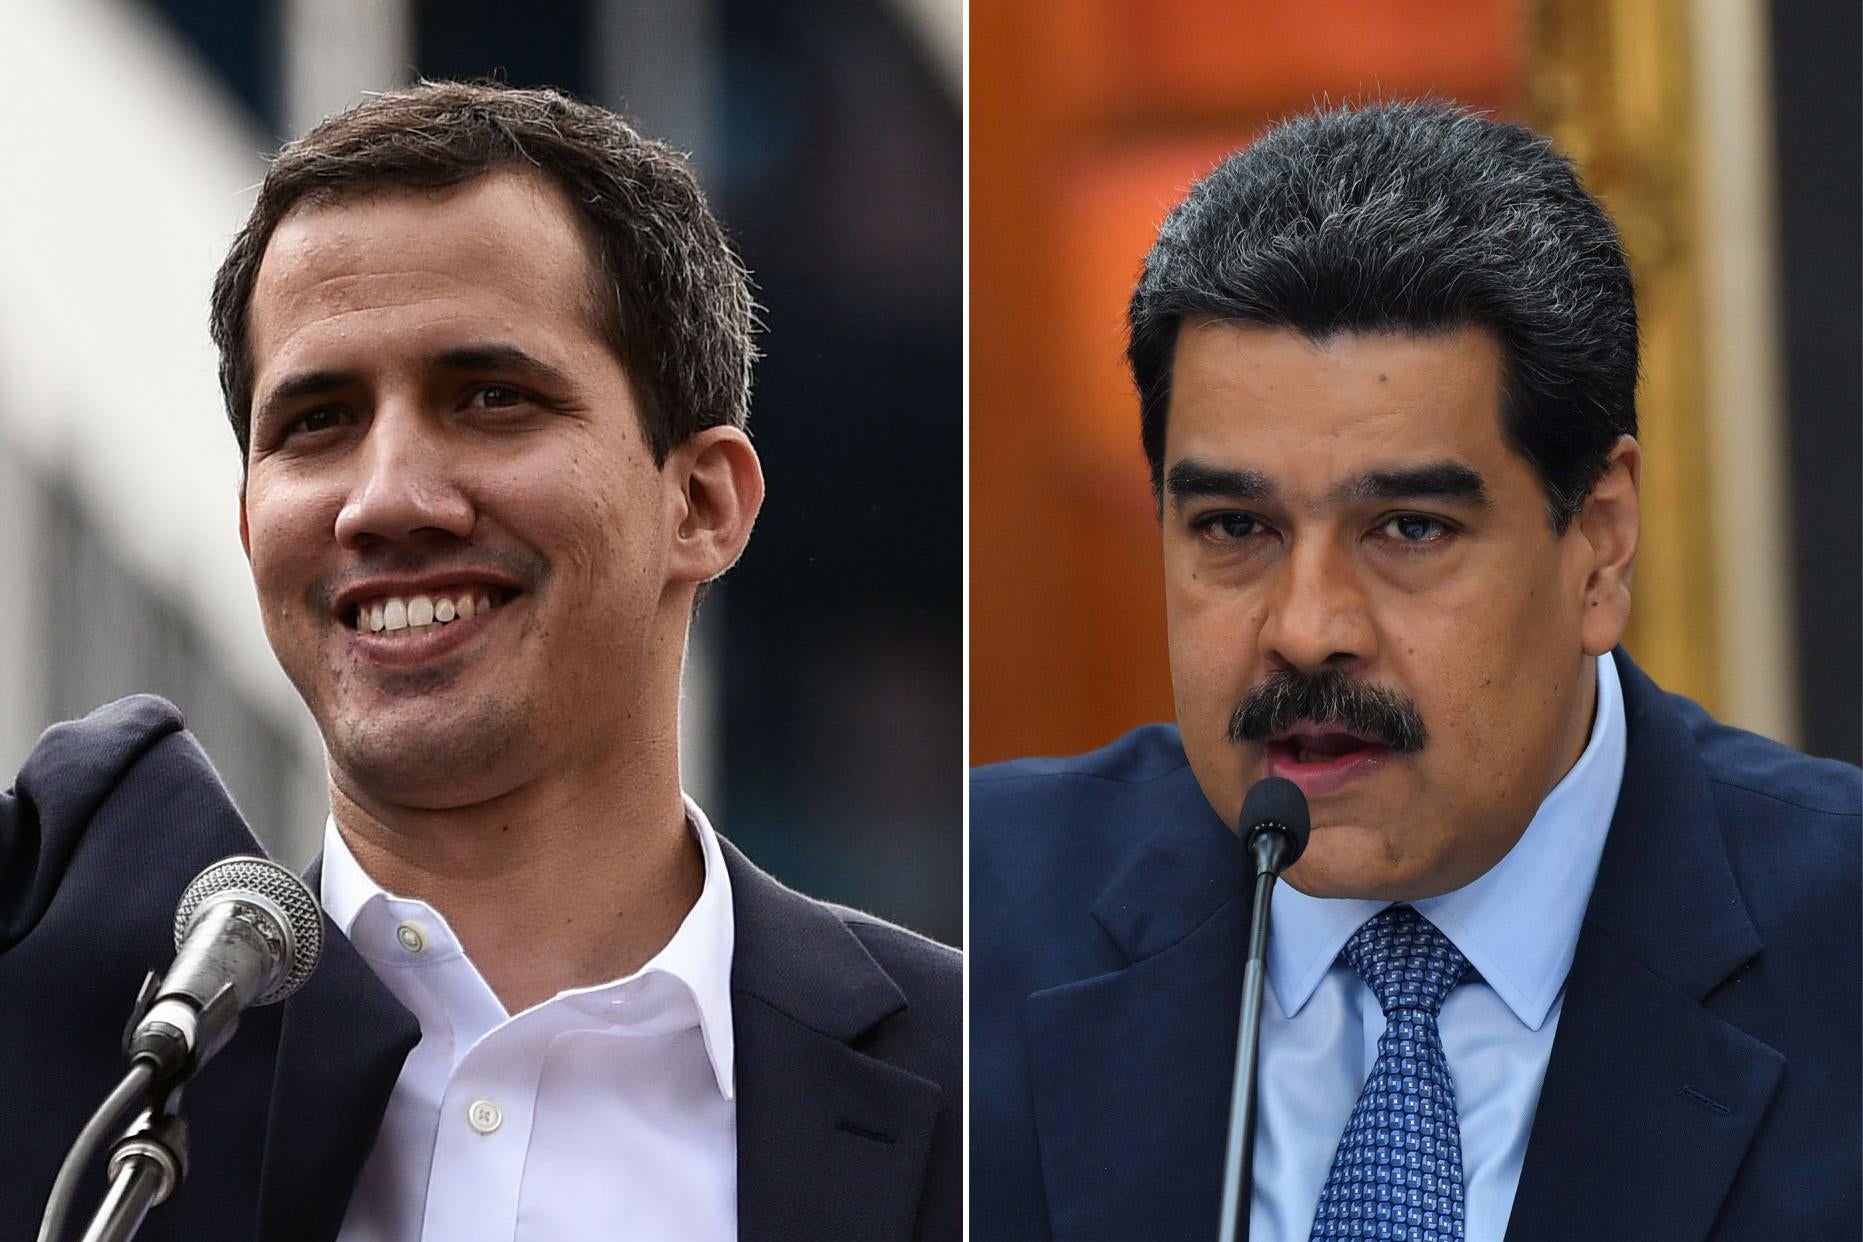 On the left is a photograph of a smiling Juan Guaidó. On the right is a photo of Nicolás Maduro.